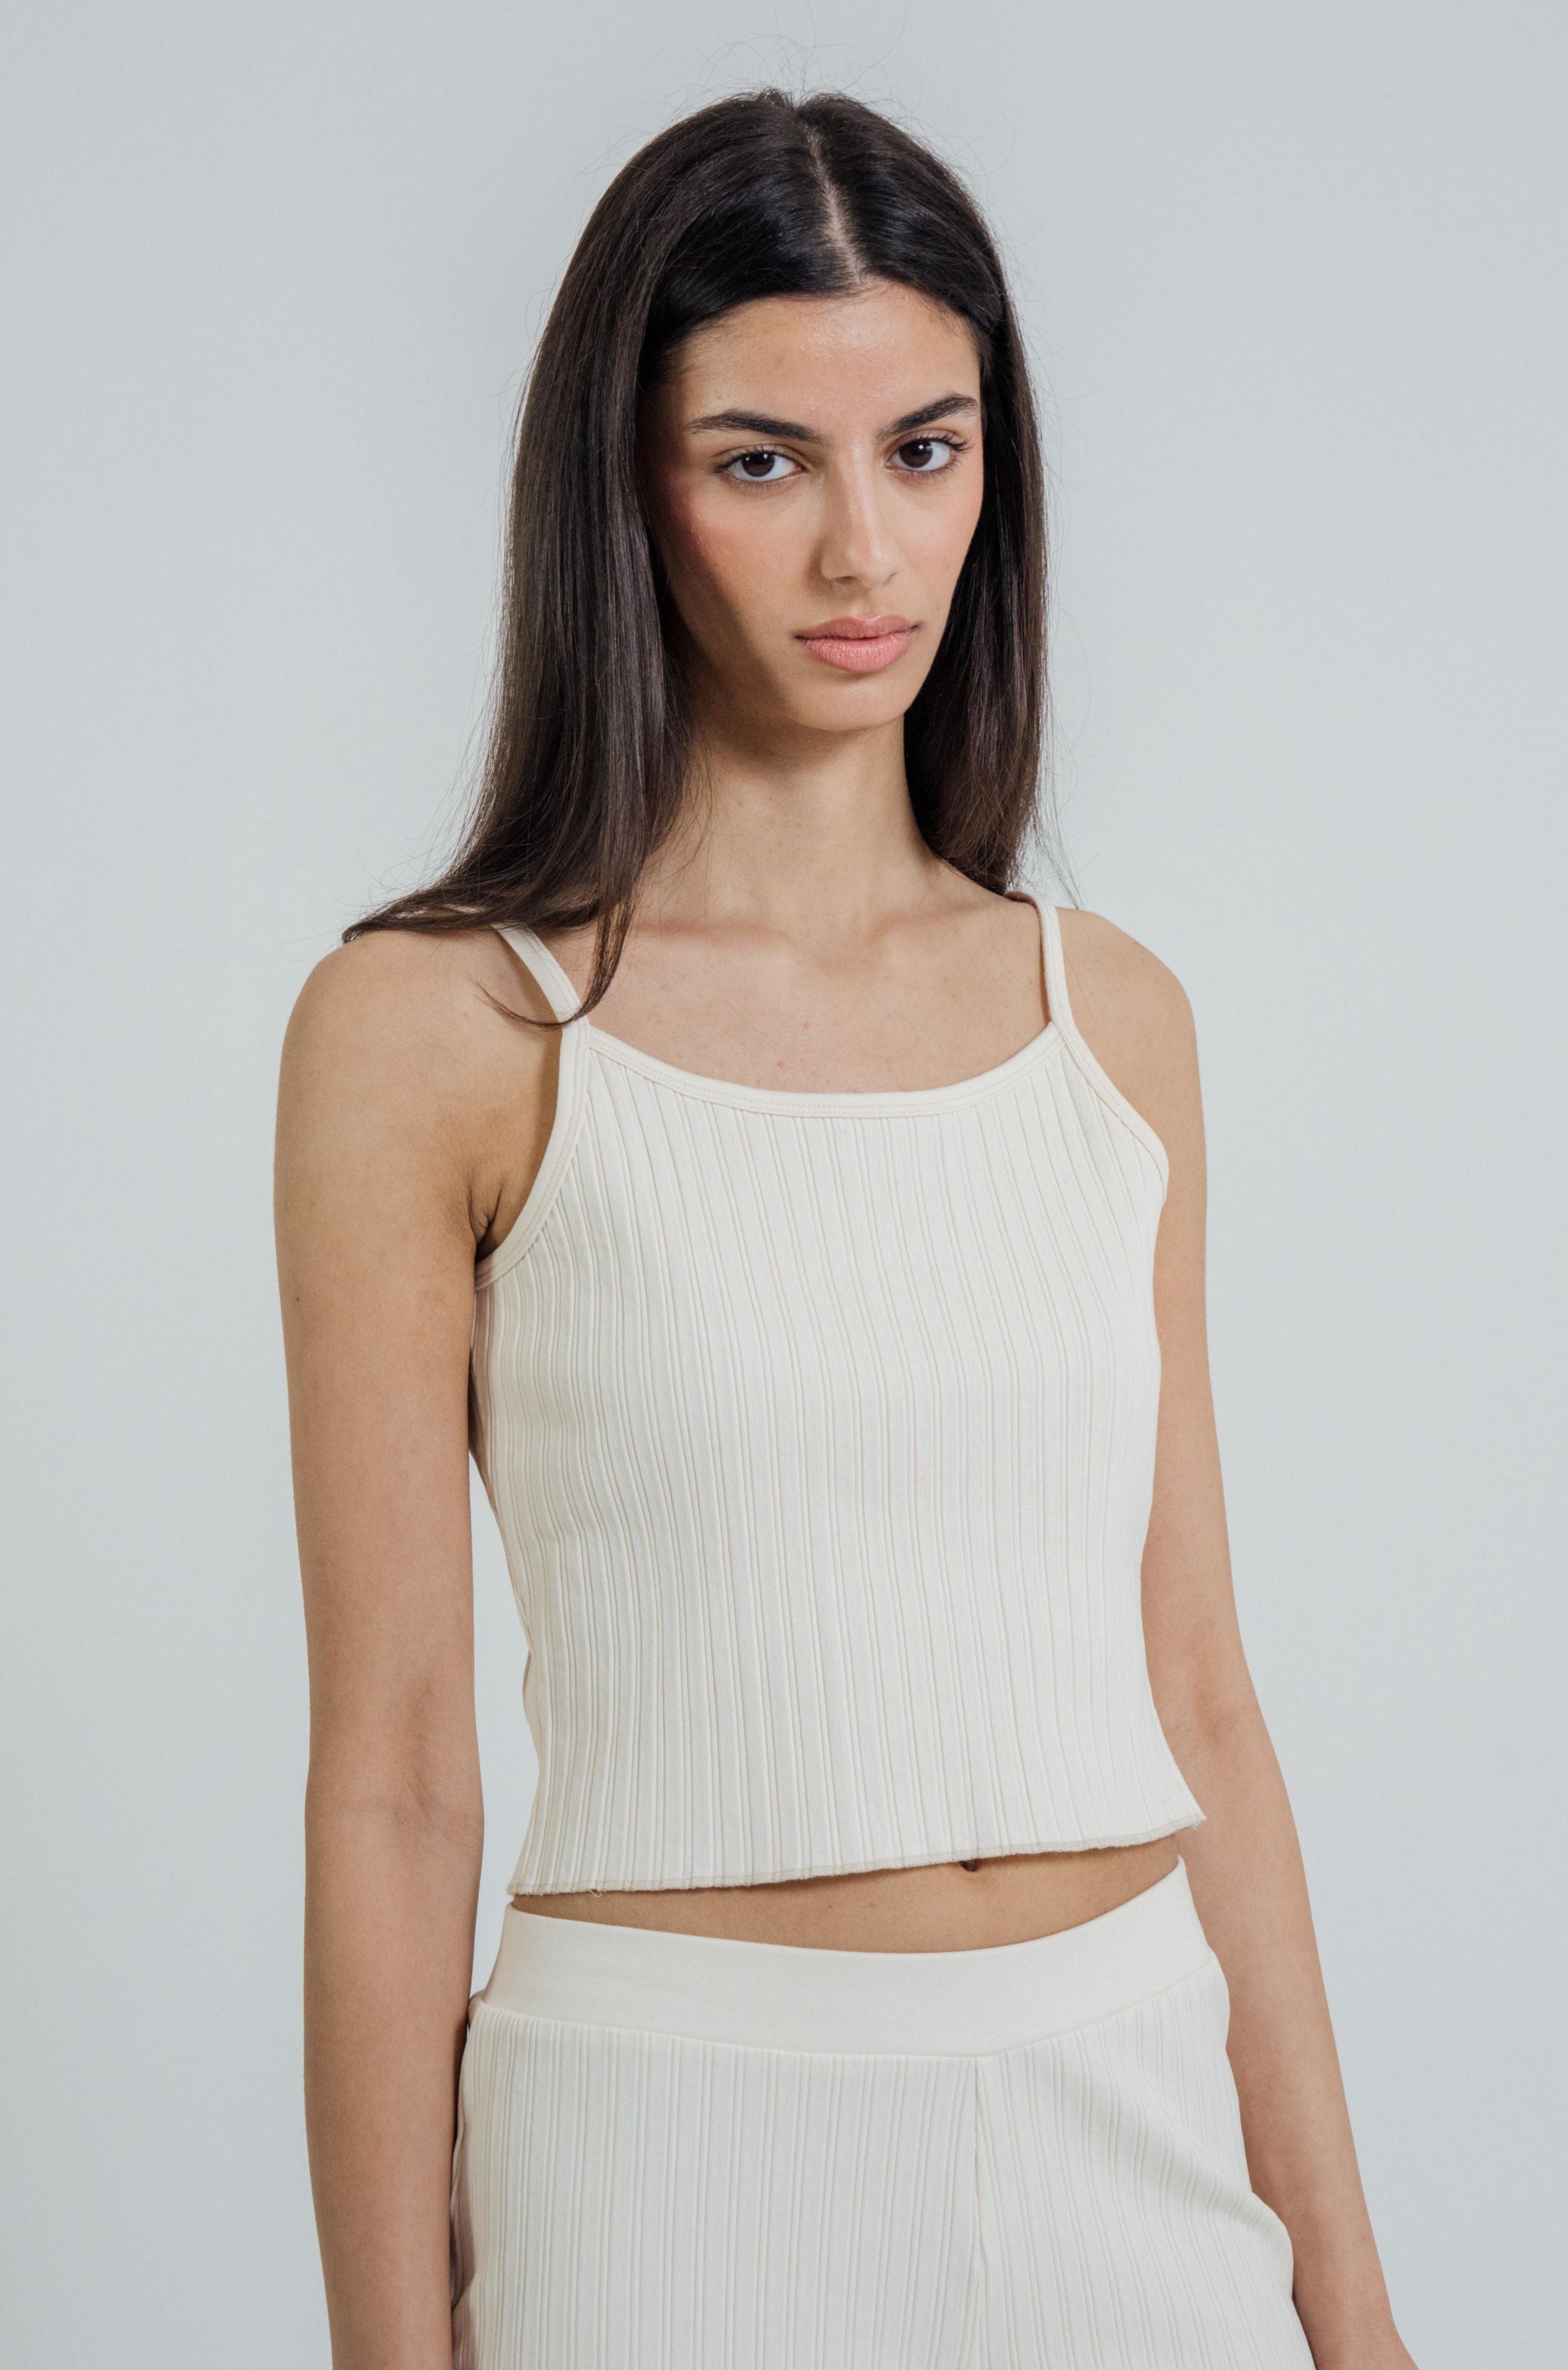 The Rib Knit Cami in Ivory